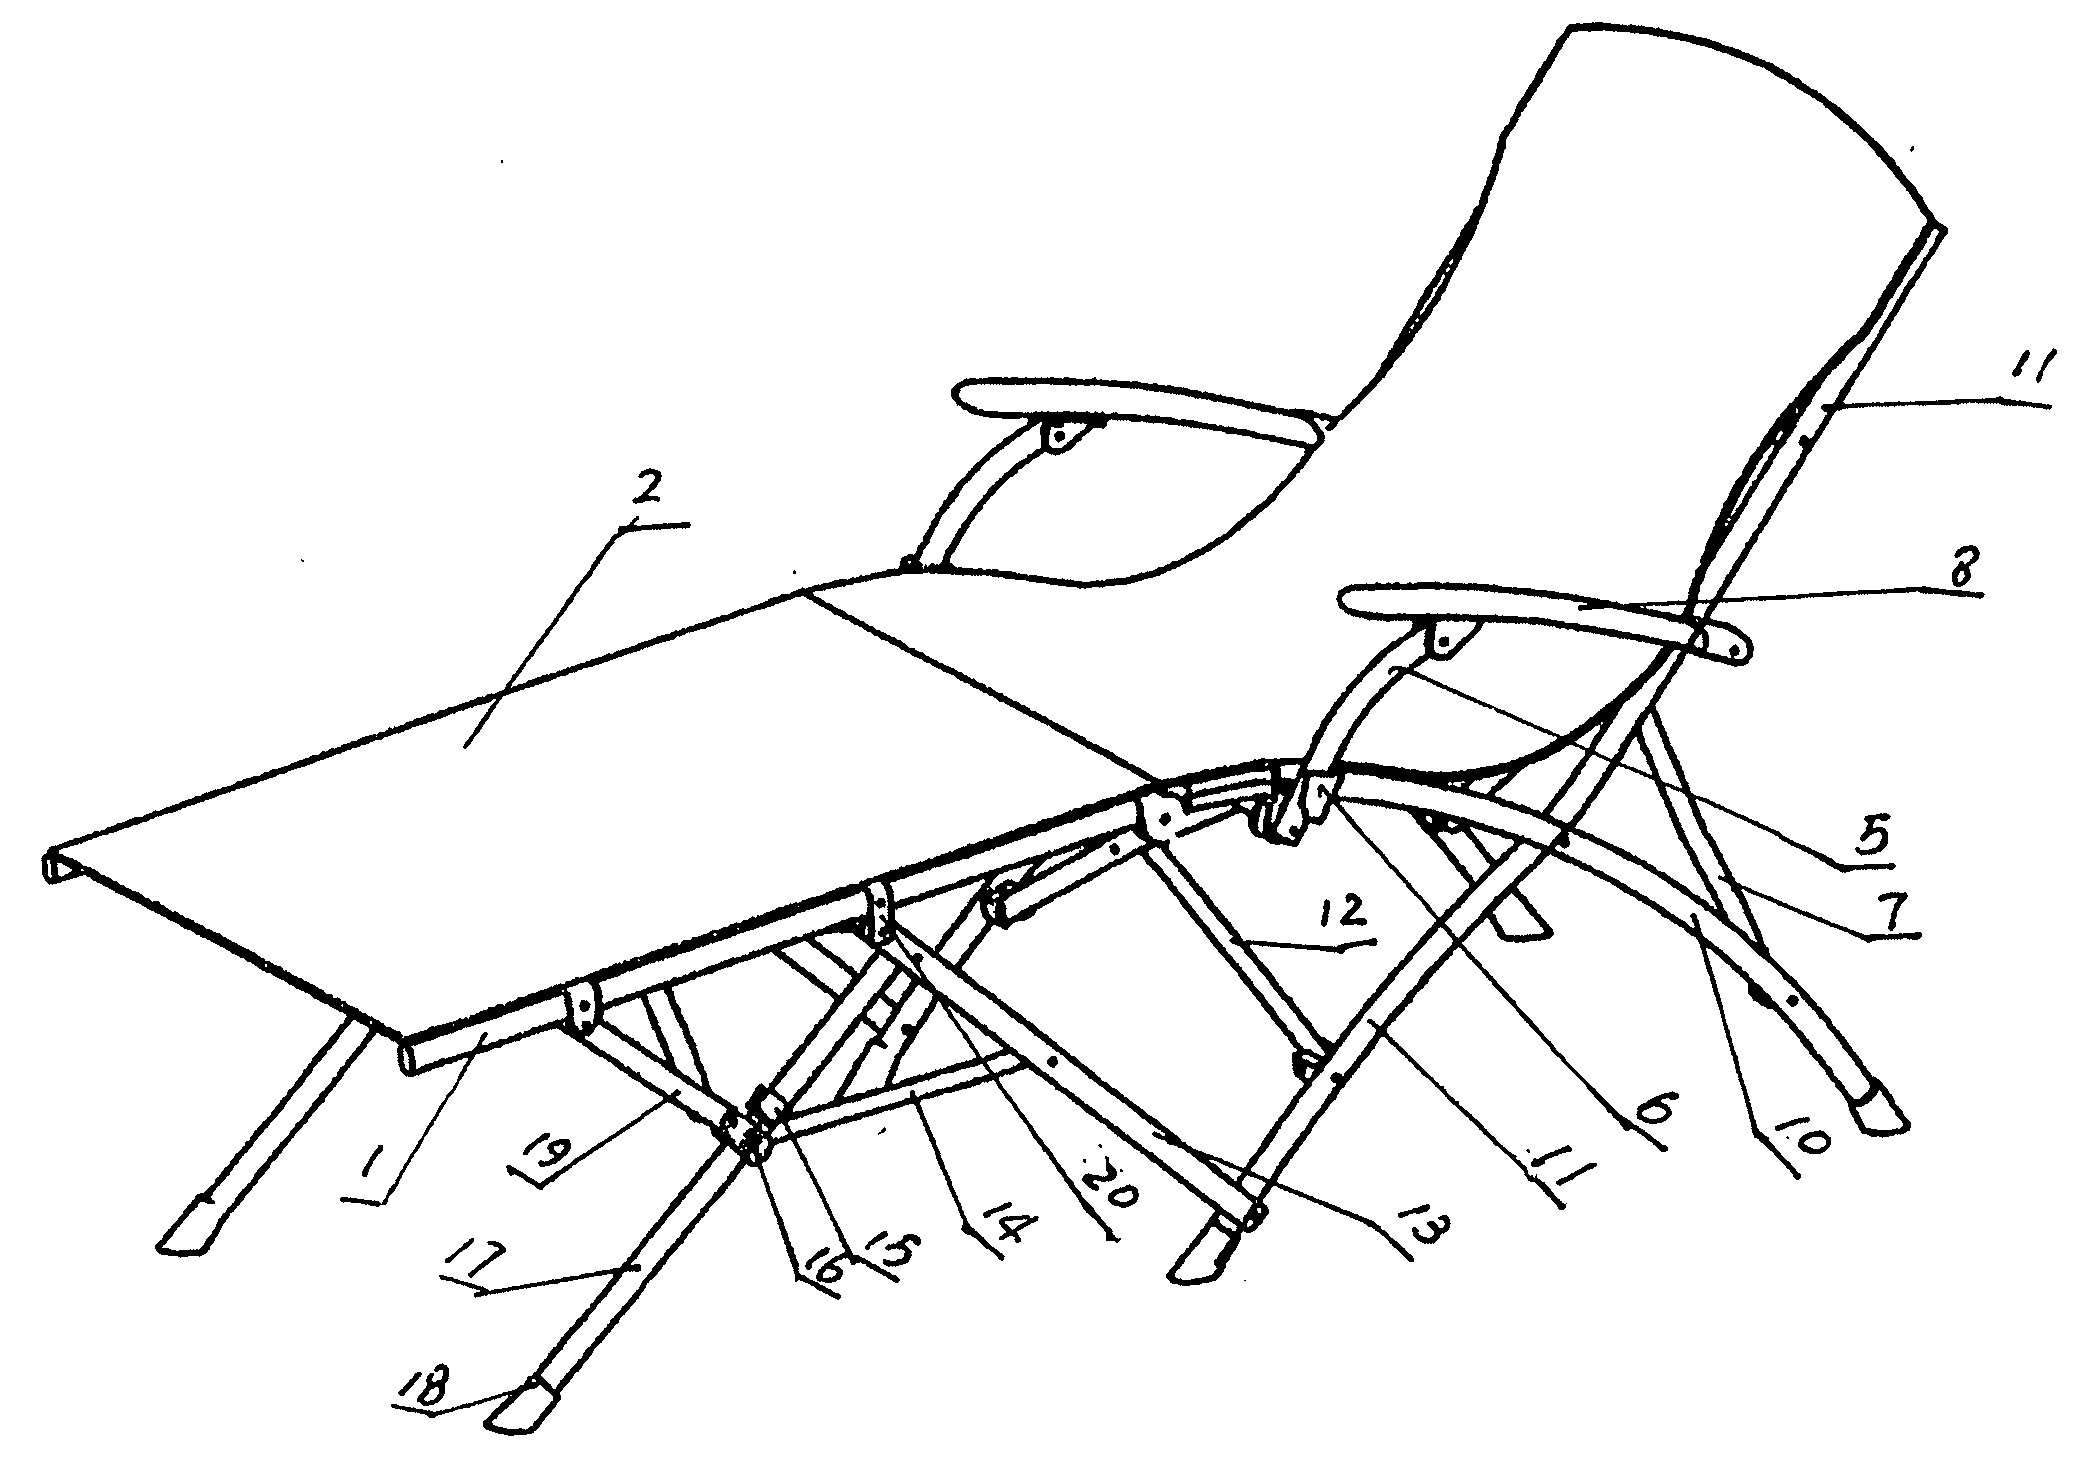 Folding bed with arms